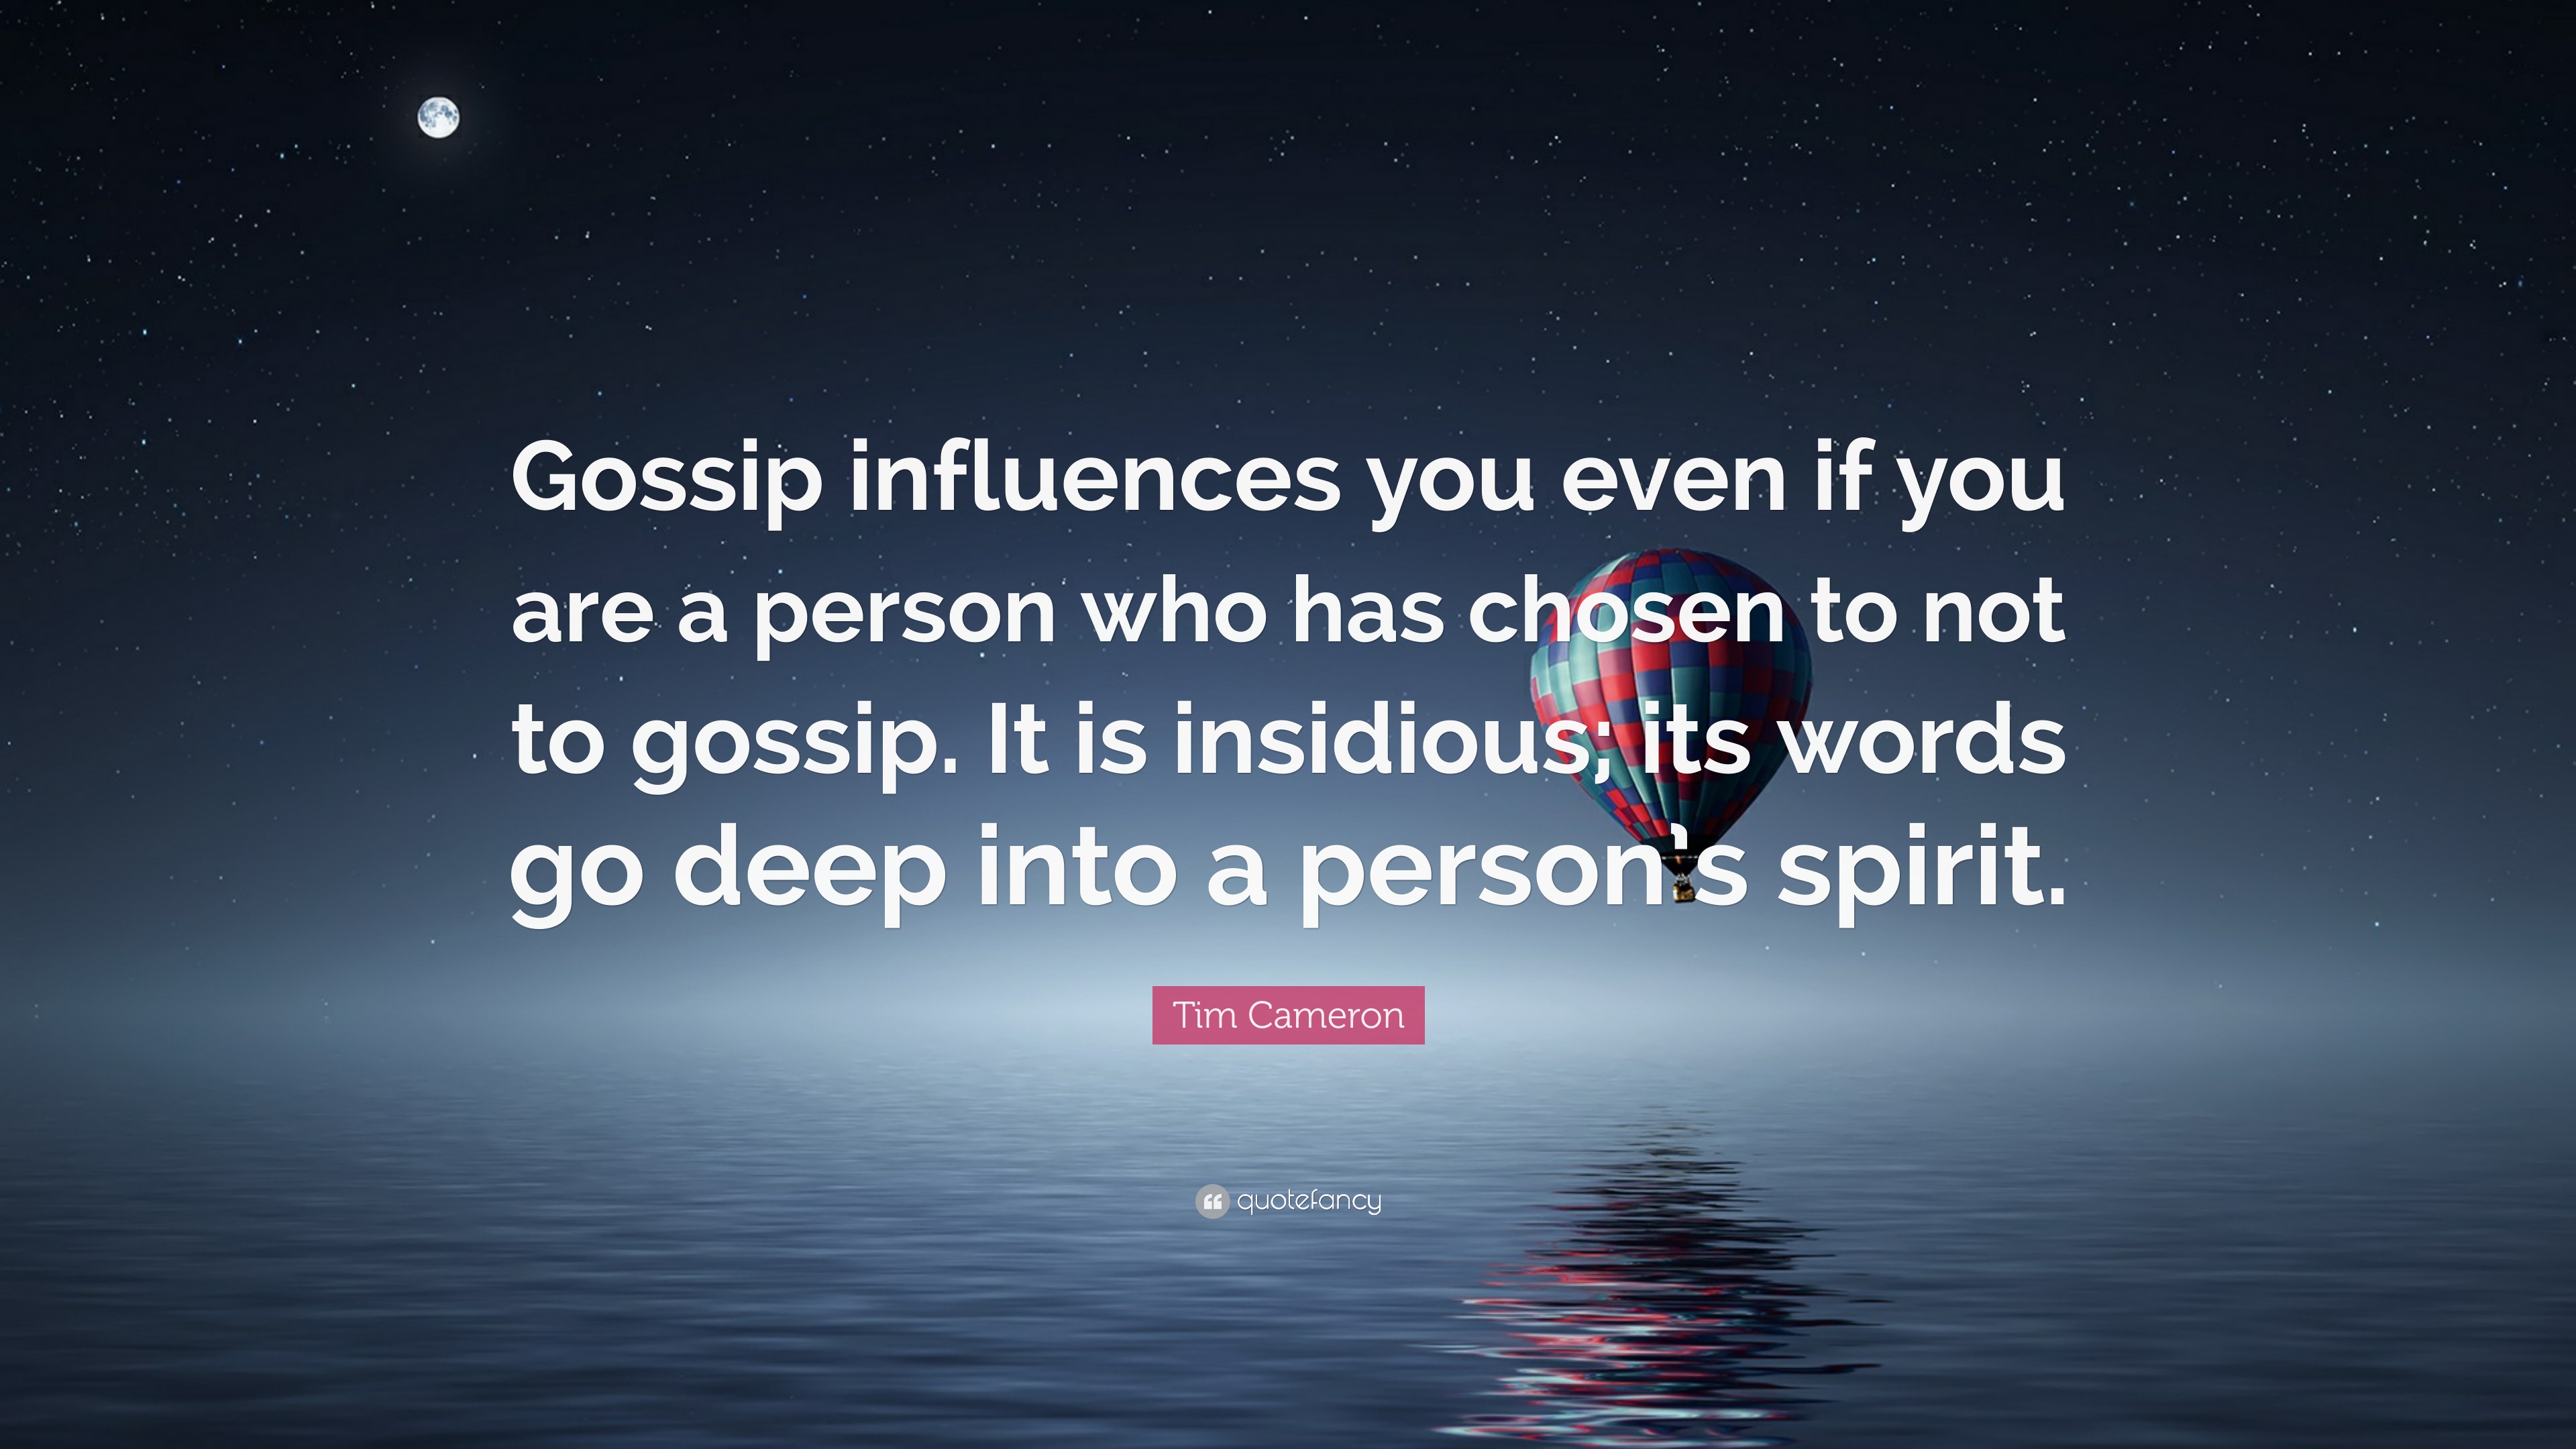 Tim Cameron Quote: “Gossip influences you even if you are a person